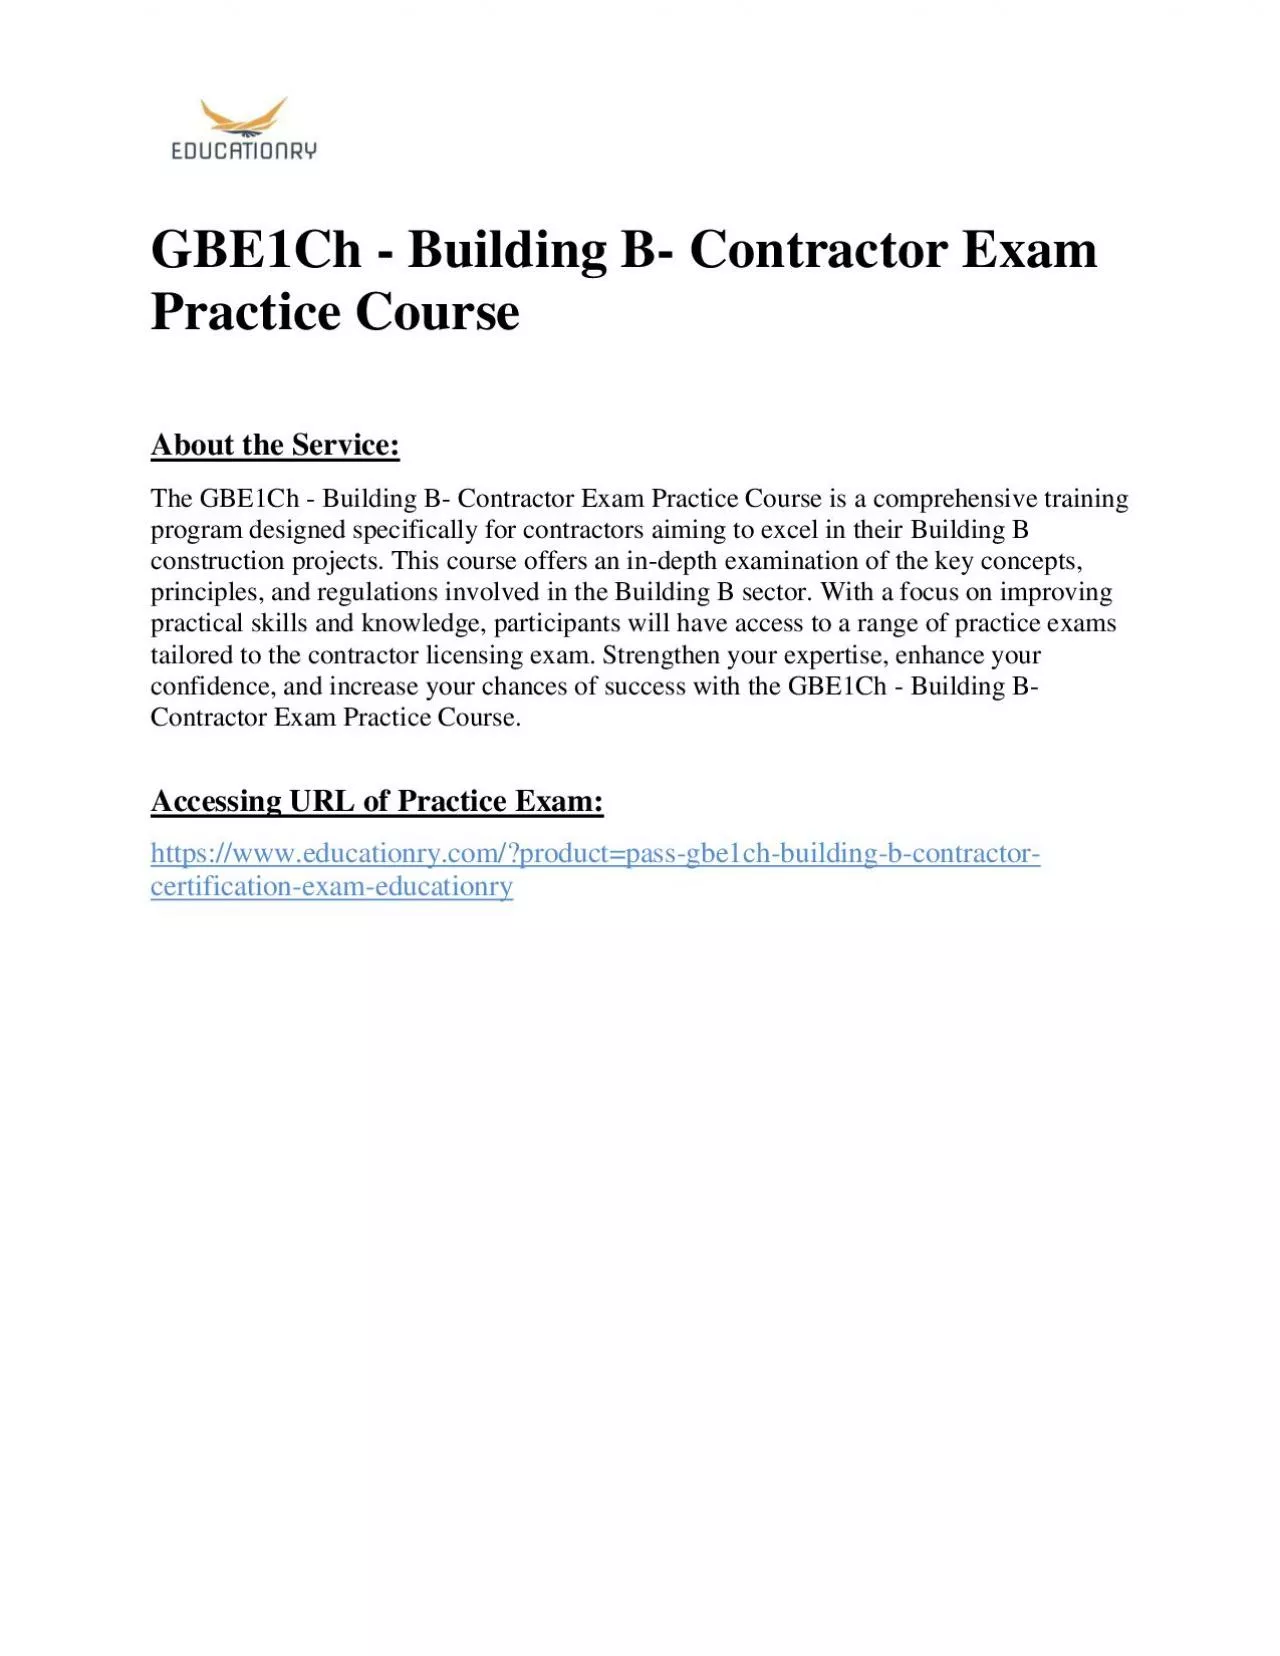 GBE1Ch - Building B- Contractor Exam Practice Course